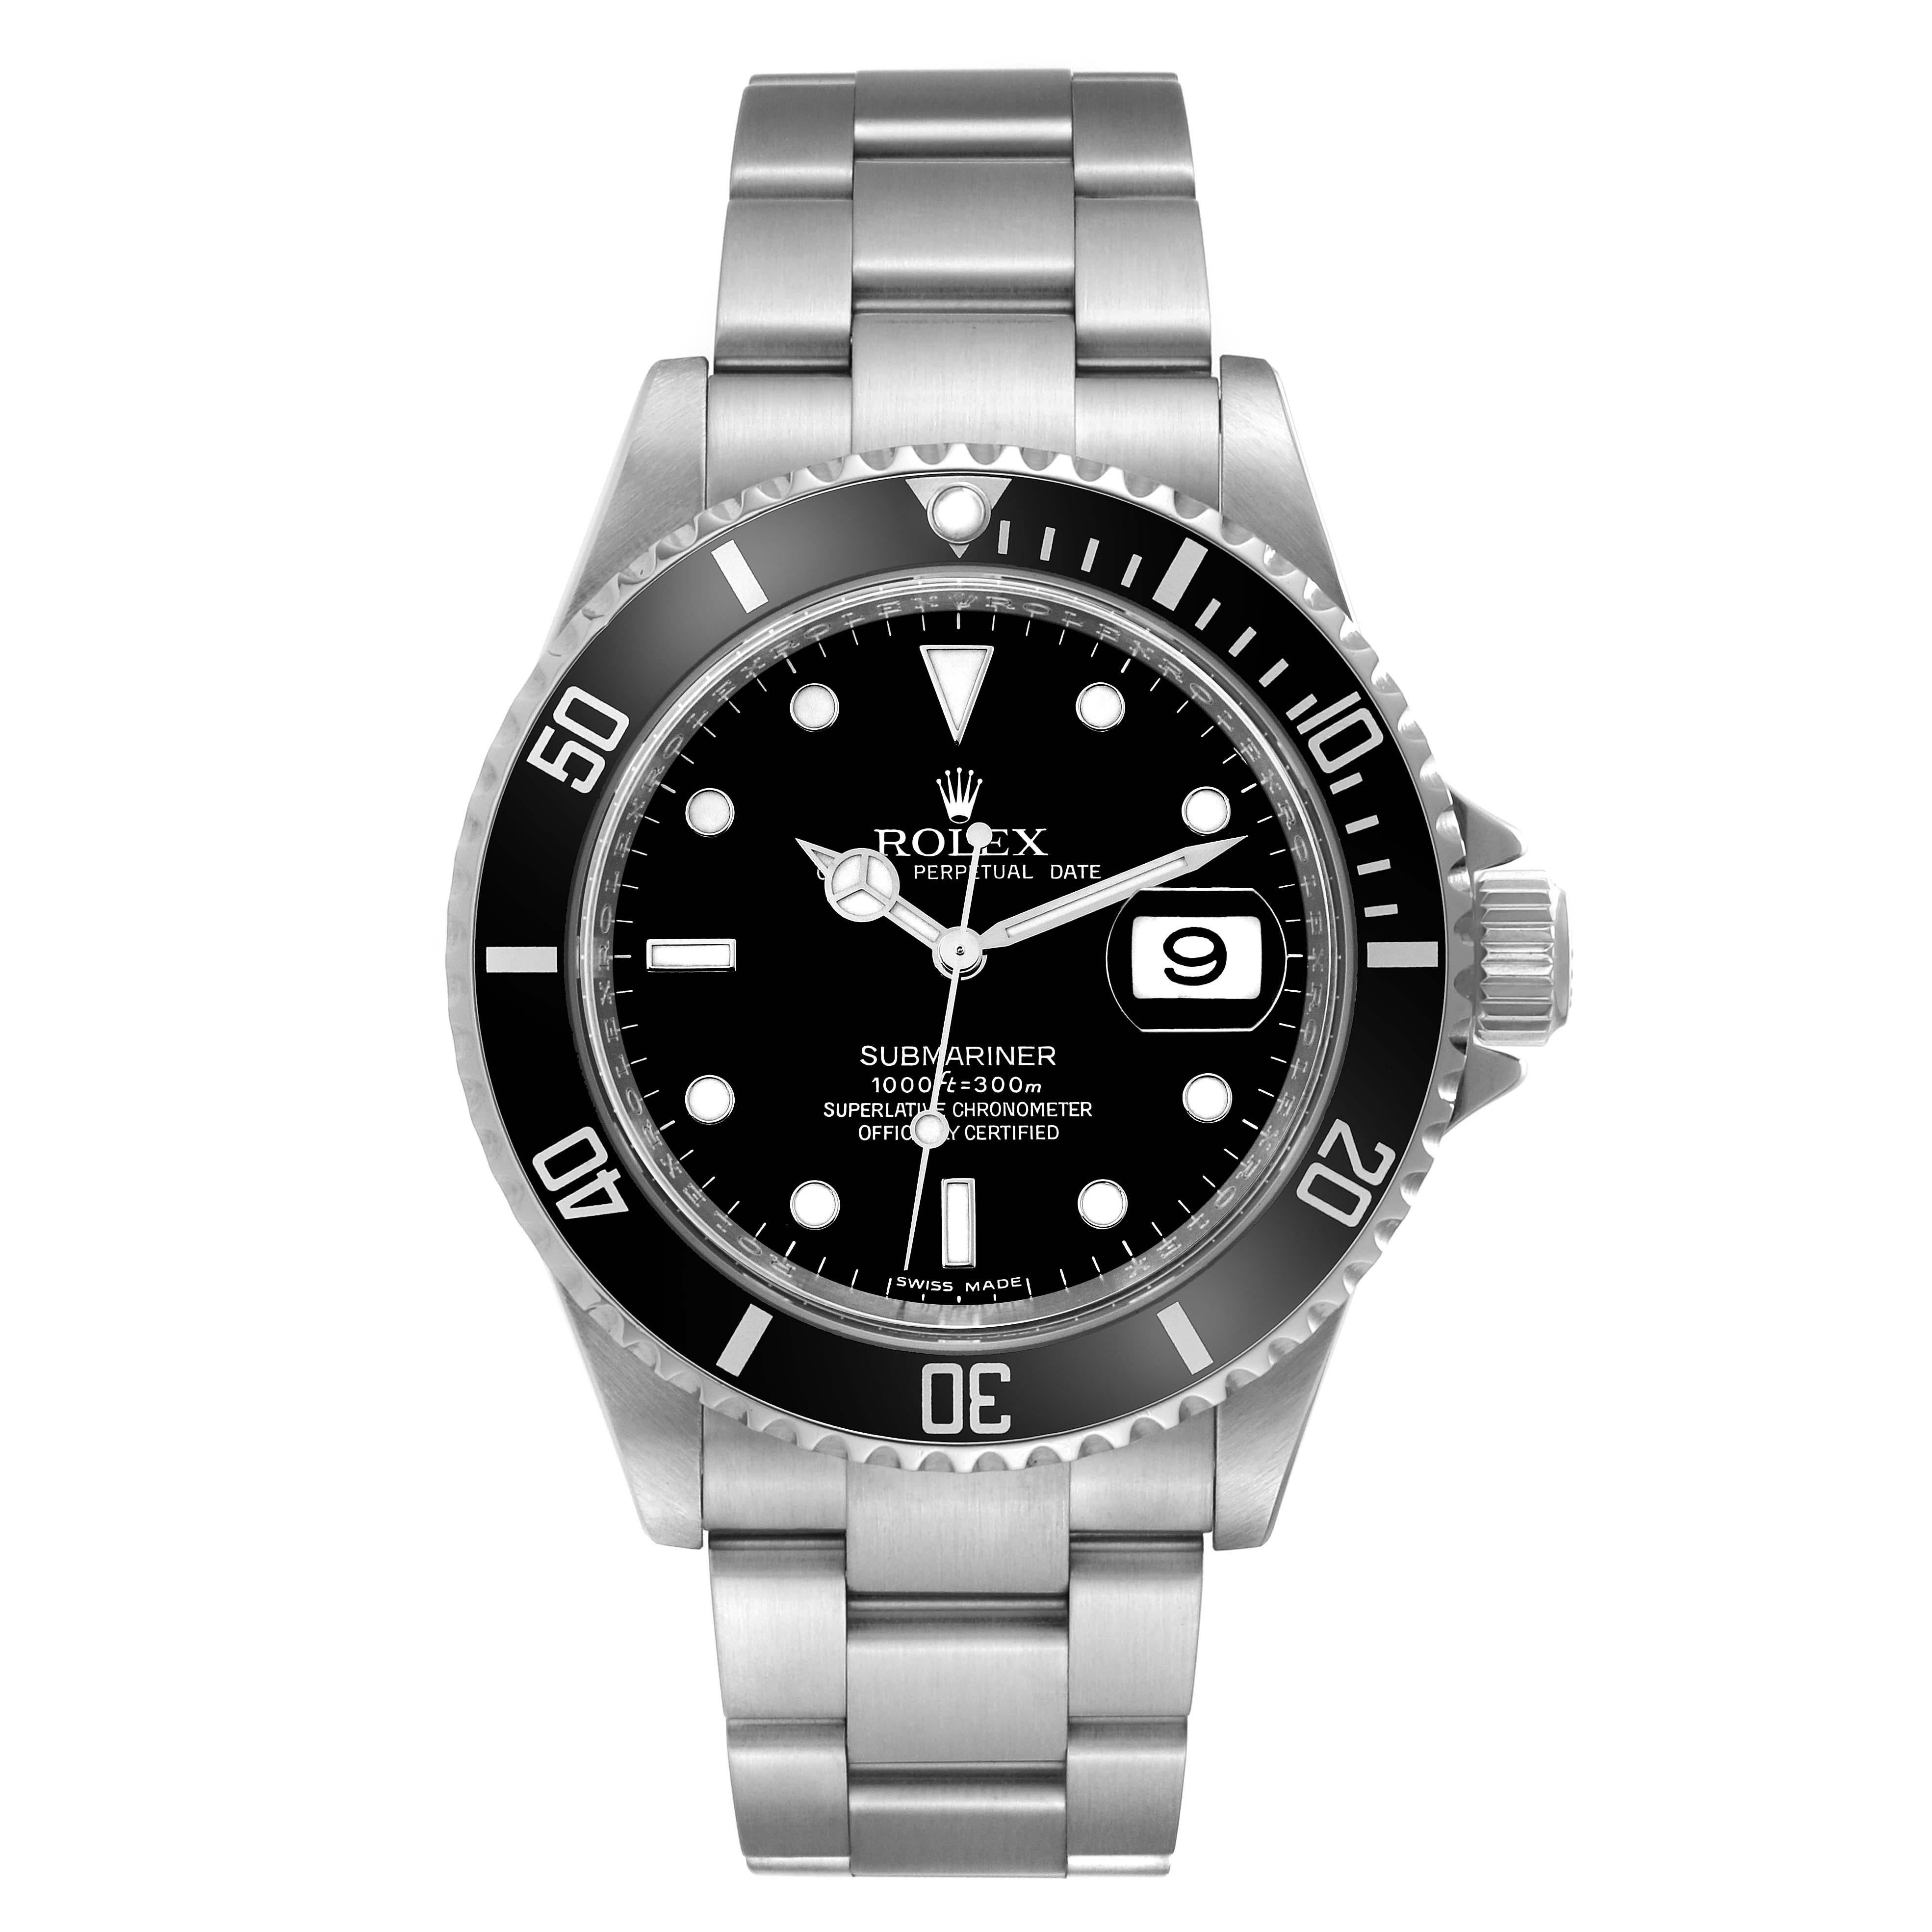 Men's Rolex Submariner Date Black Dial Steel Mens Watch 16610 Box Card For Sale